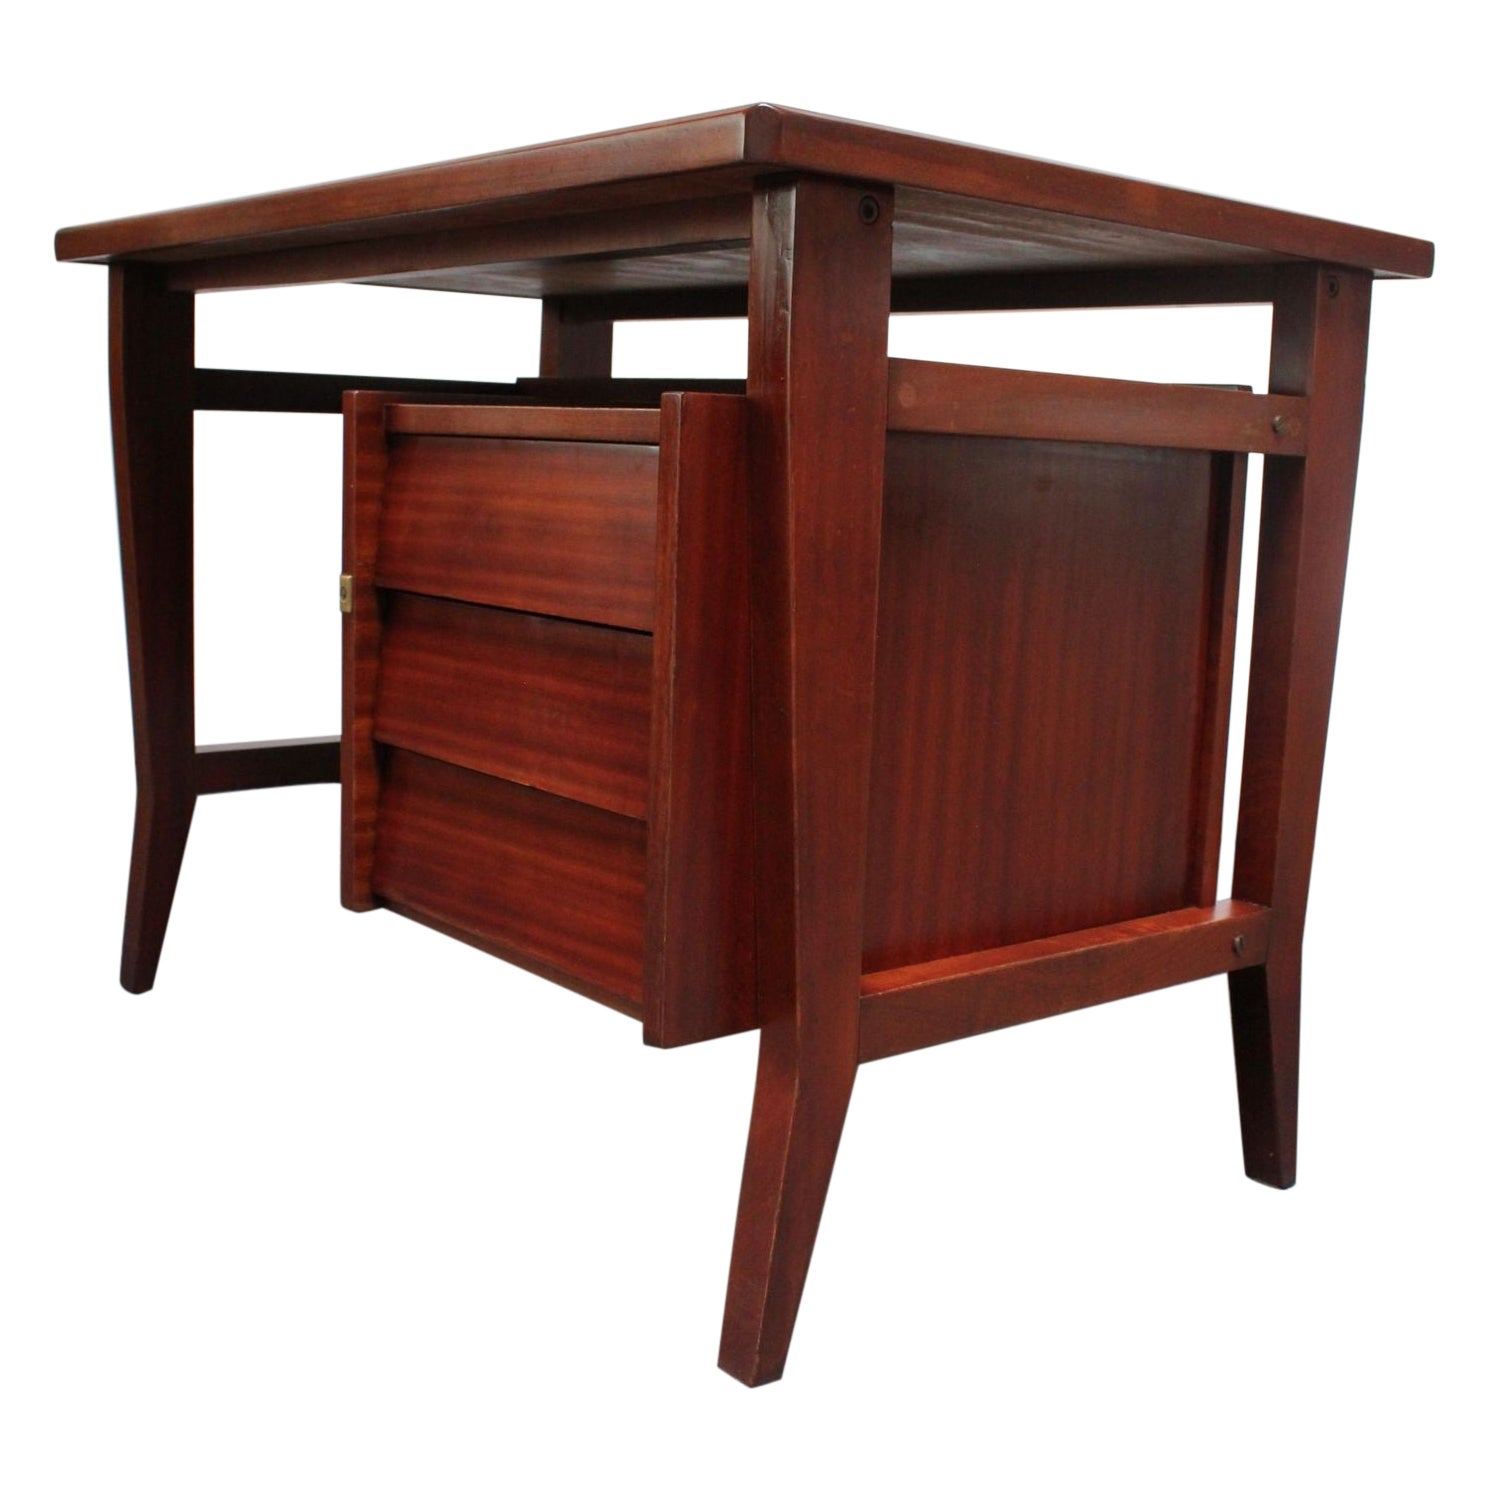 Petite Italian Modern Stained Mahogany Writing Desk by Gio Ponti for Schirolli For Sale